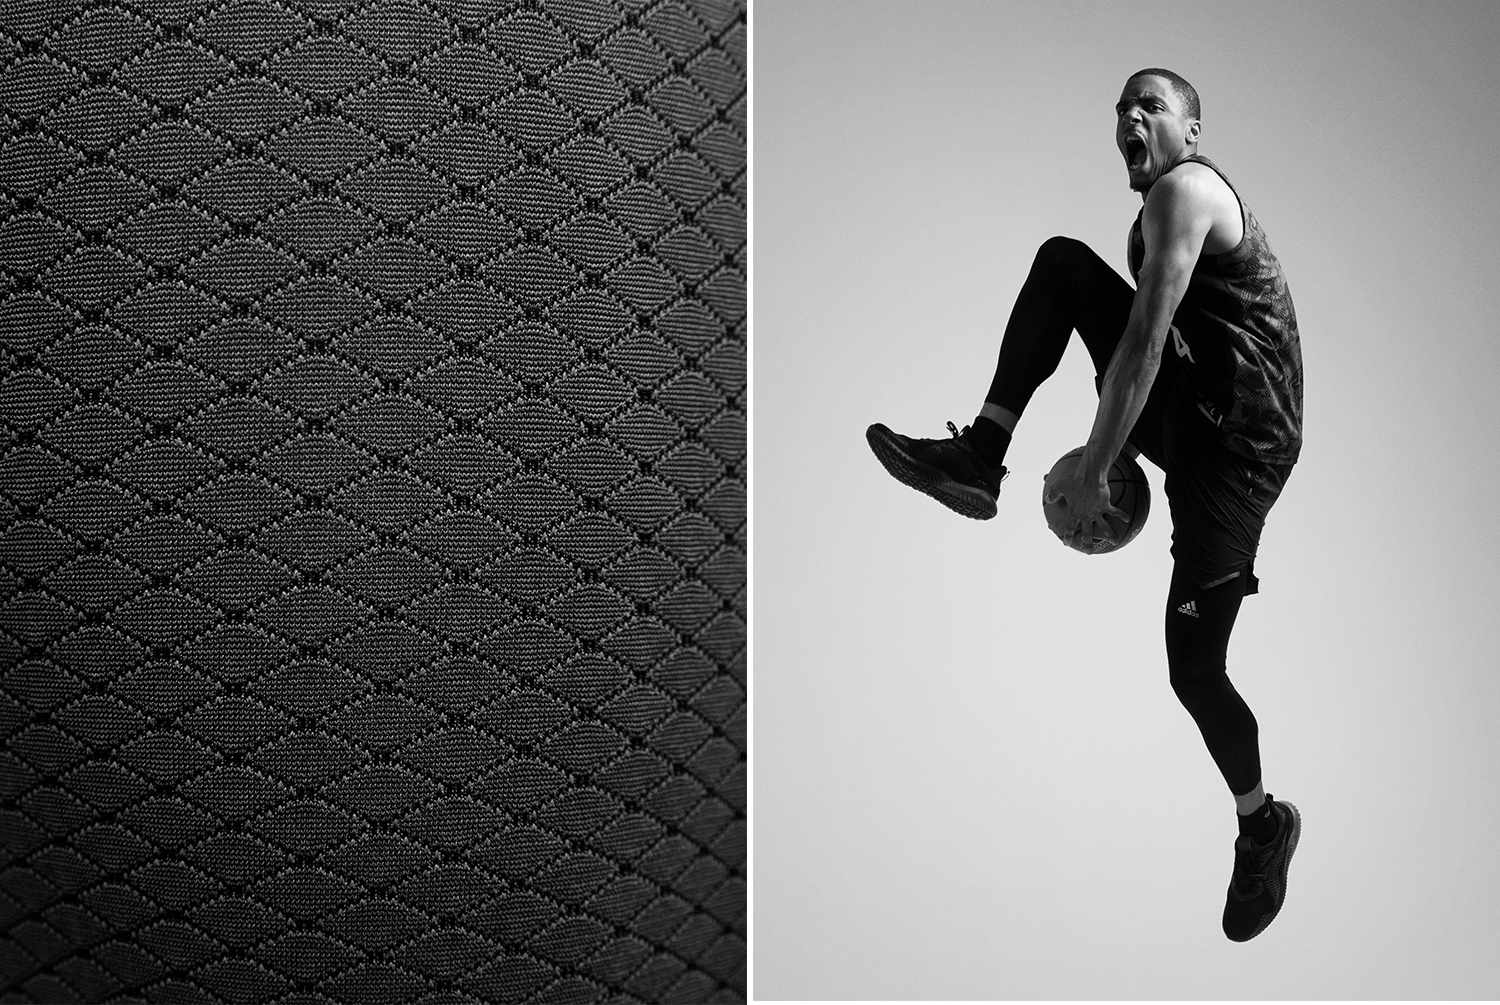 An action shot and a detail shot of a Veniceball League player with in an Adidas outfit photographed by Maximilian Baier